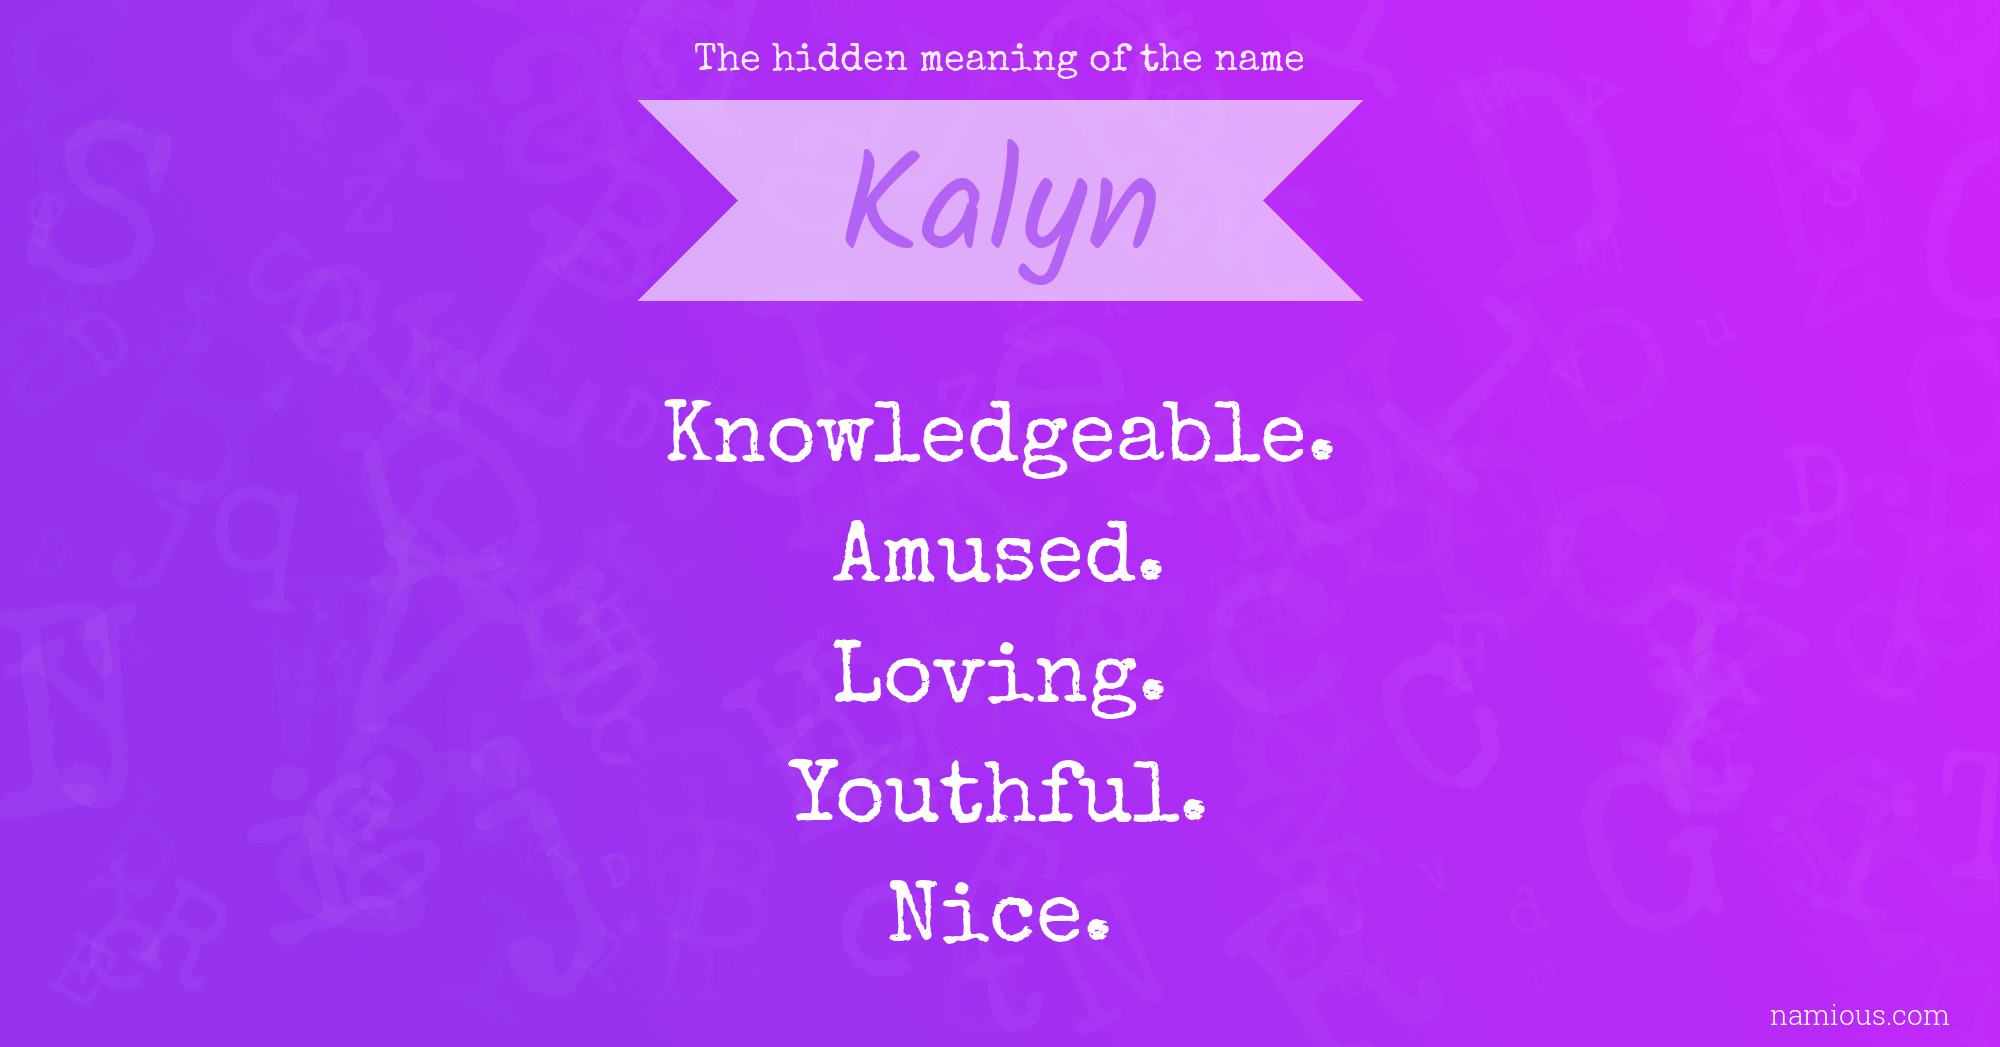 The hidden meaning of the name Kalyn